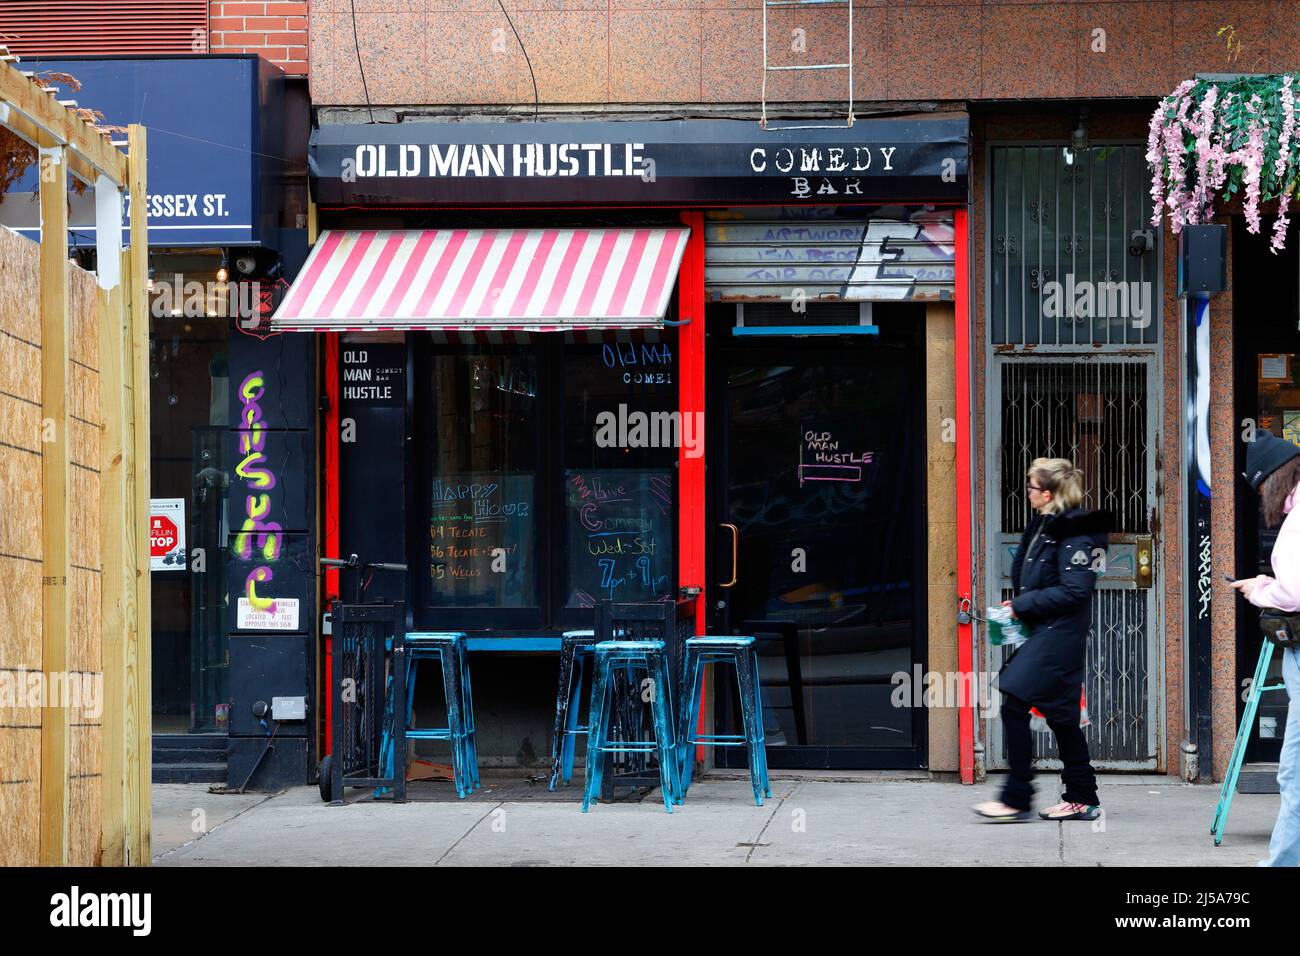 Old Man Hustle, 39 Essex St, New York, NYC storefront photo of a bar and comedy club in the Lower East Side neighborhood in Manhattan Stock Photo